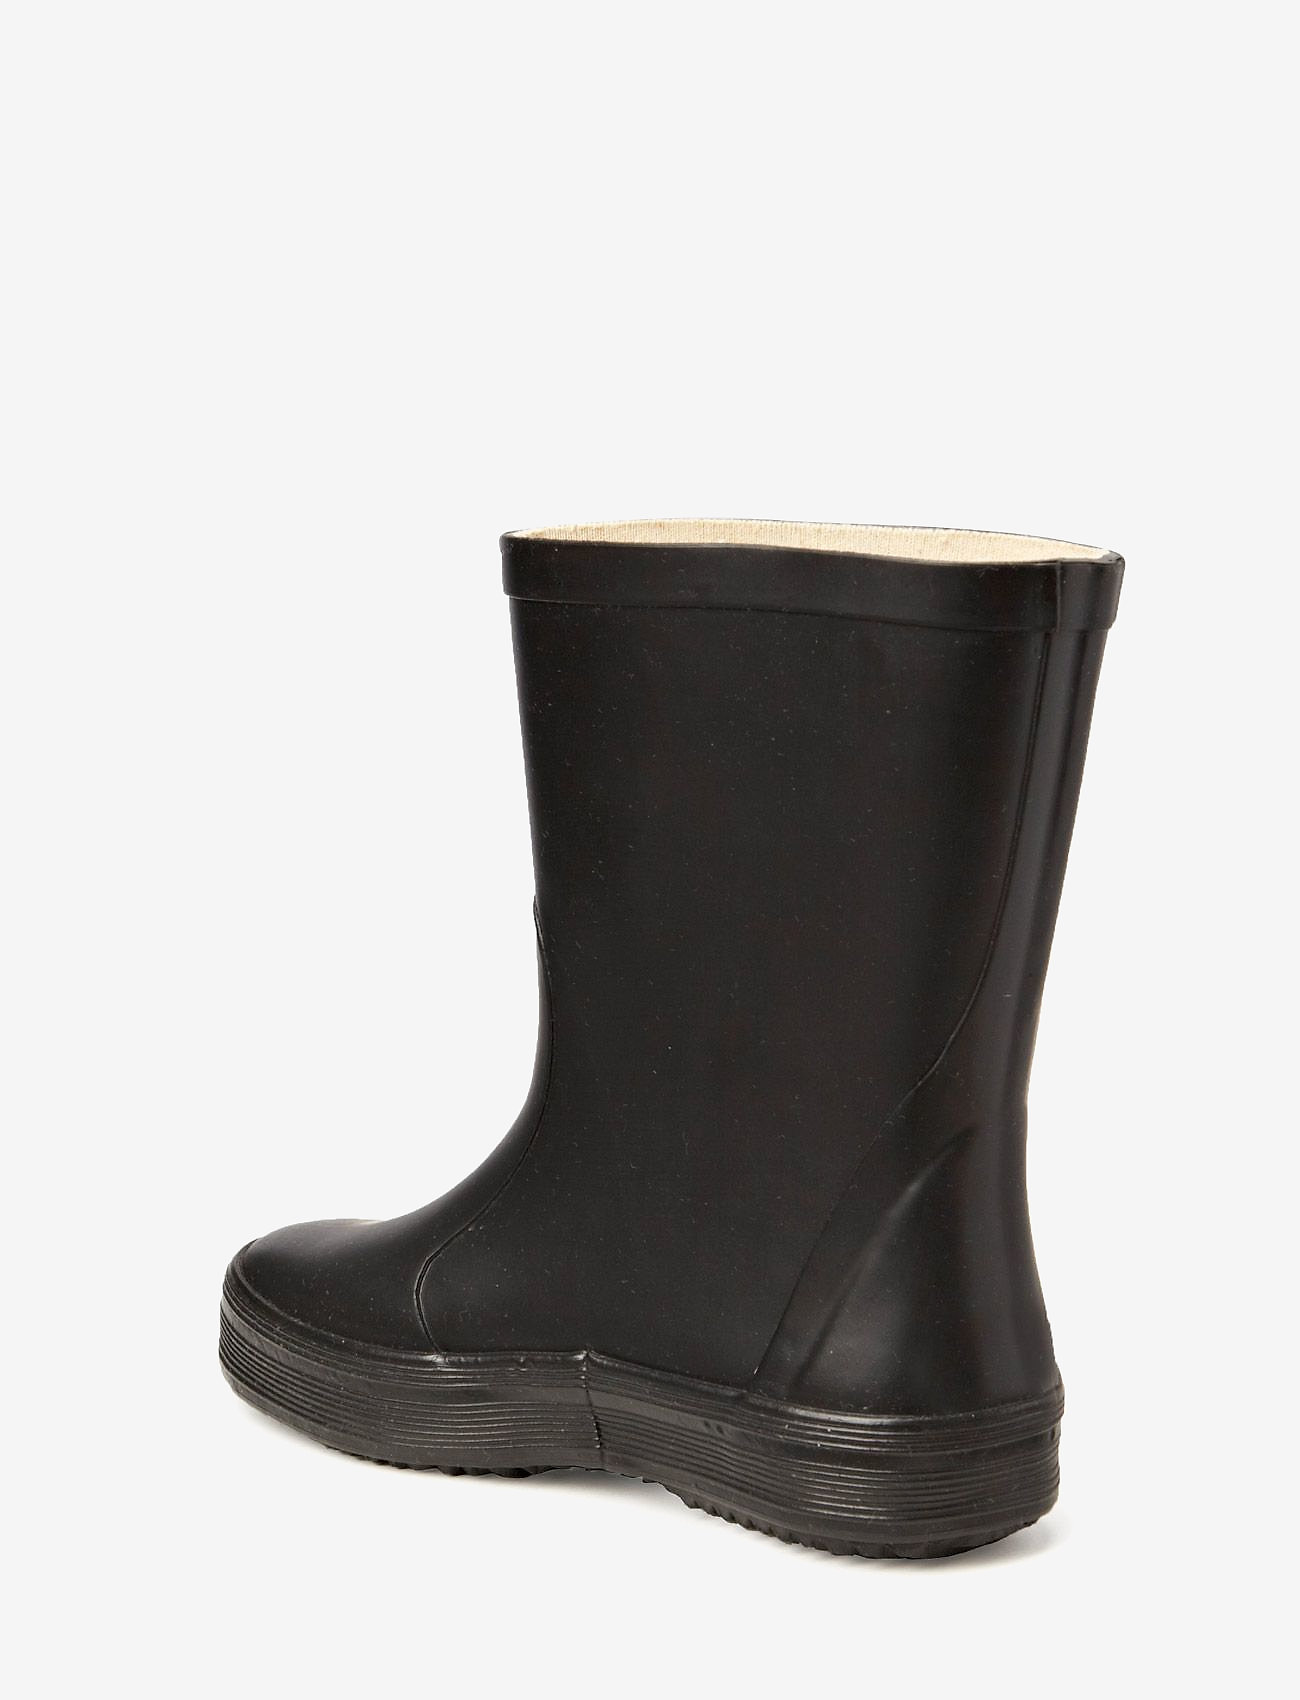 CeLaVi - Basic wellies -solid - unlined rubberboots - black - 1